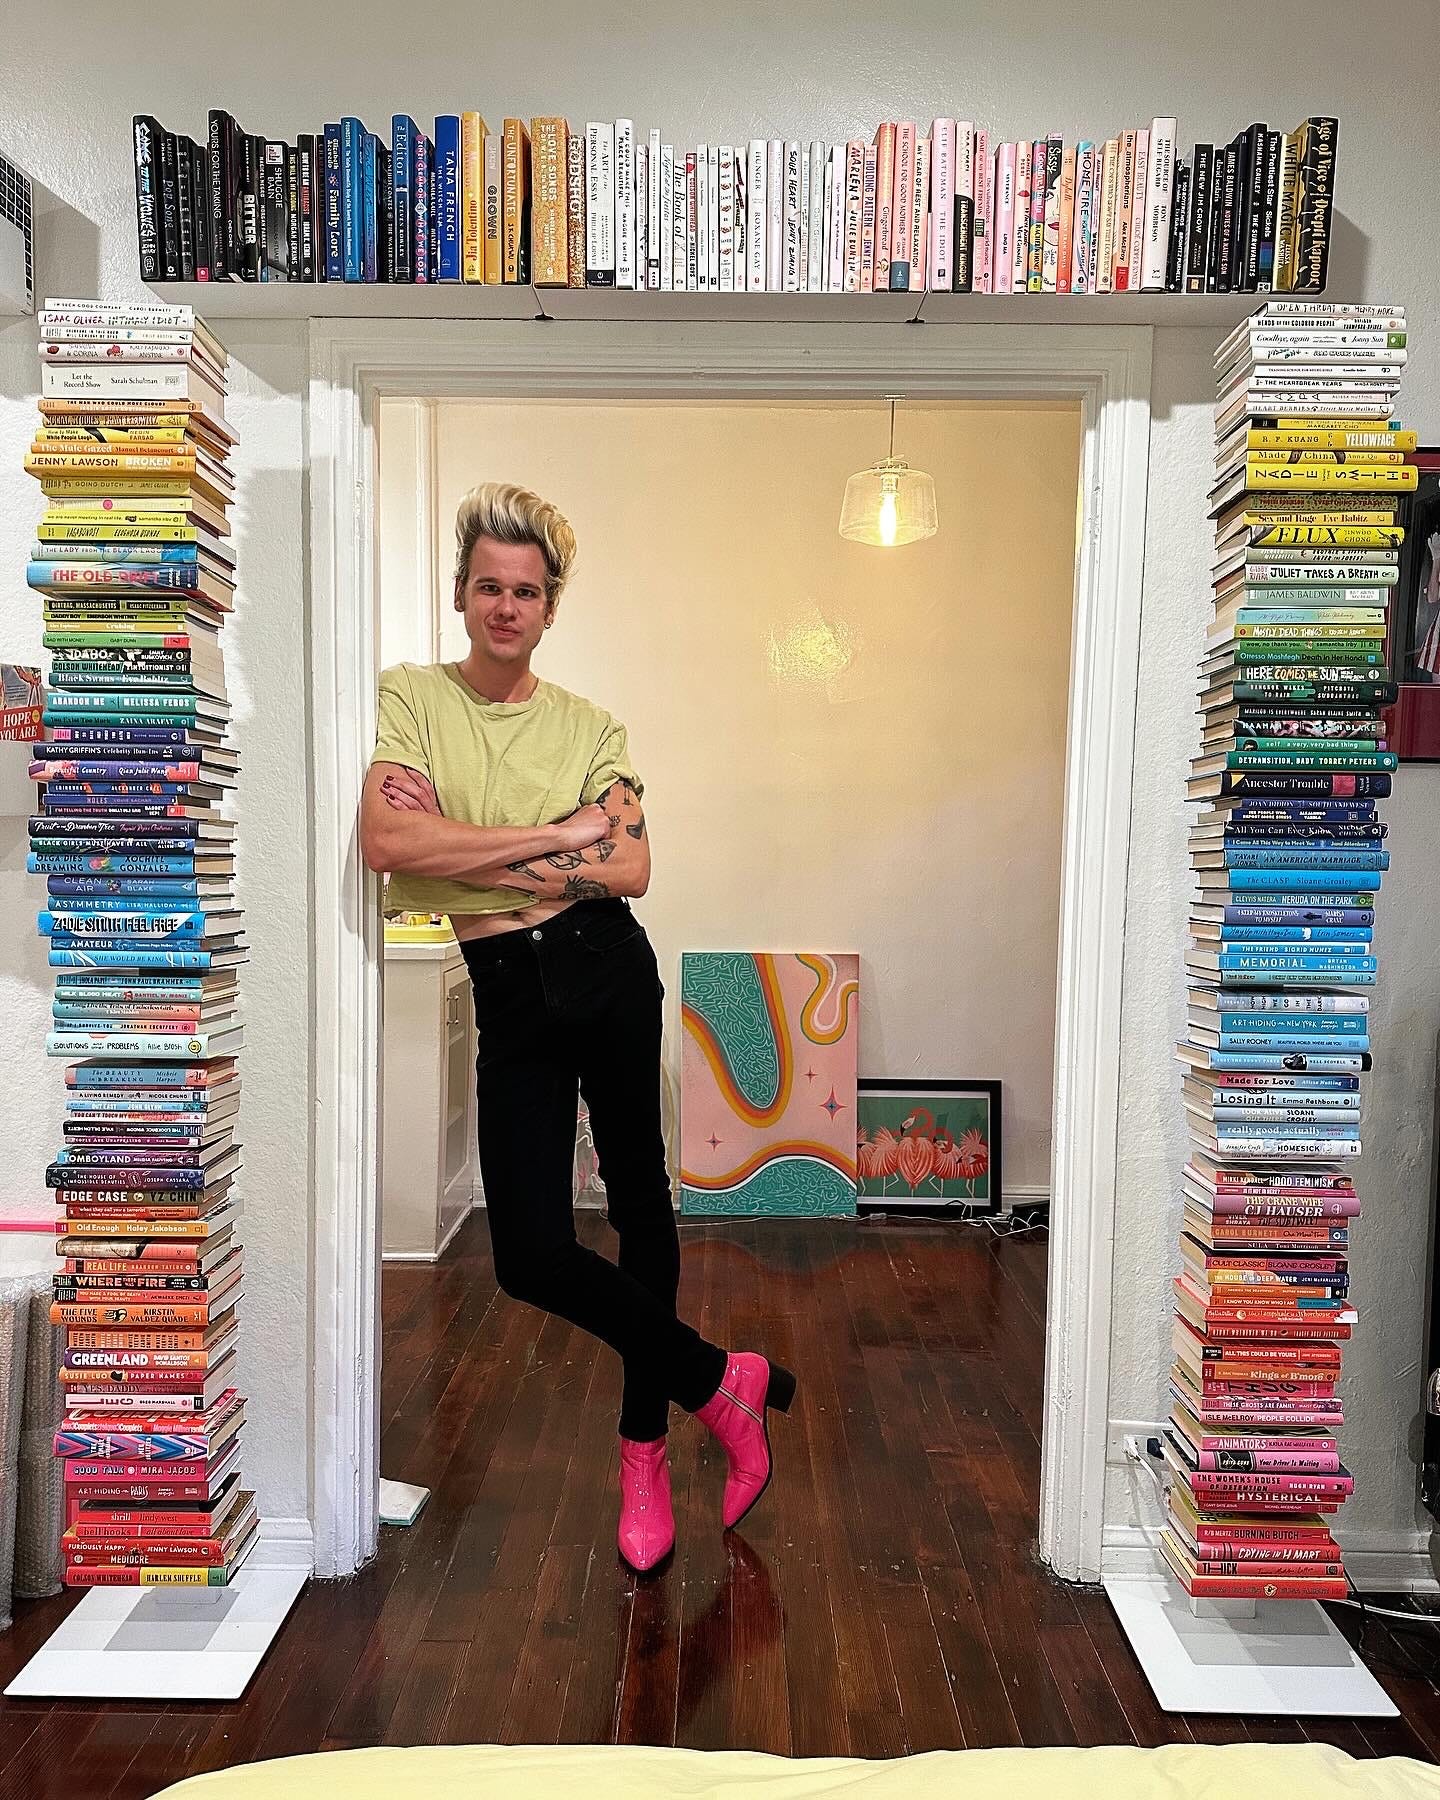 A photo of author Greg Mania standing in a doorway framed by his color-coded book collection